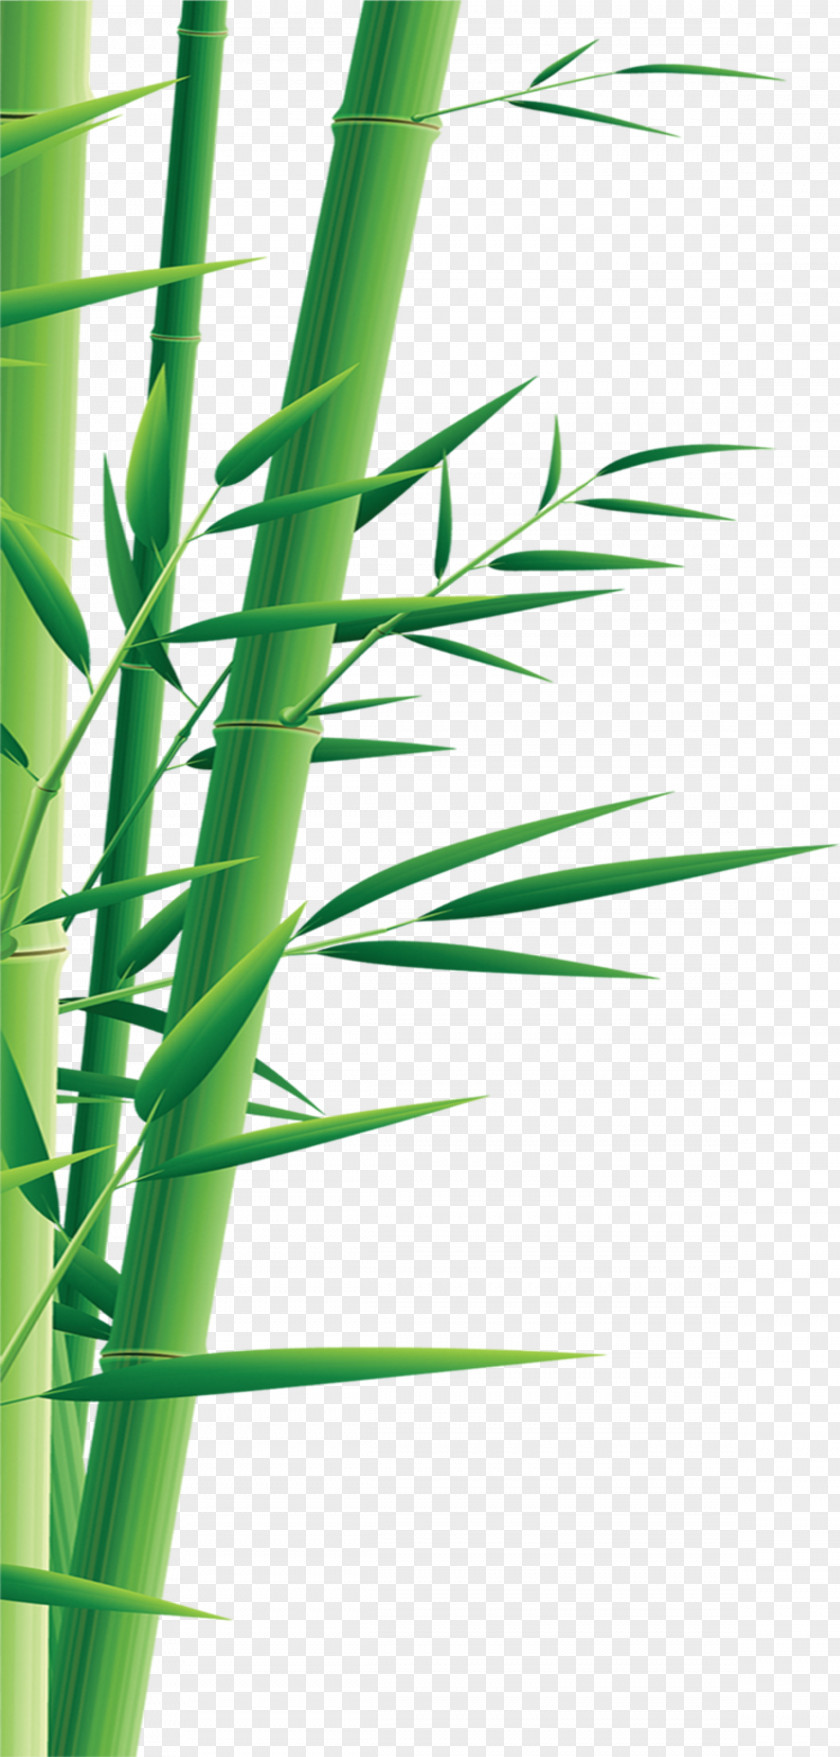 Bamboo Graphic Design Illustration PNG